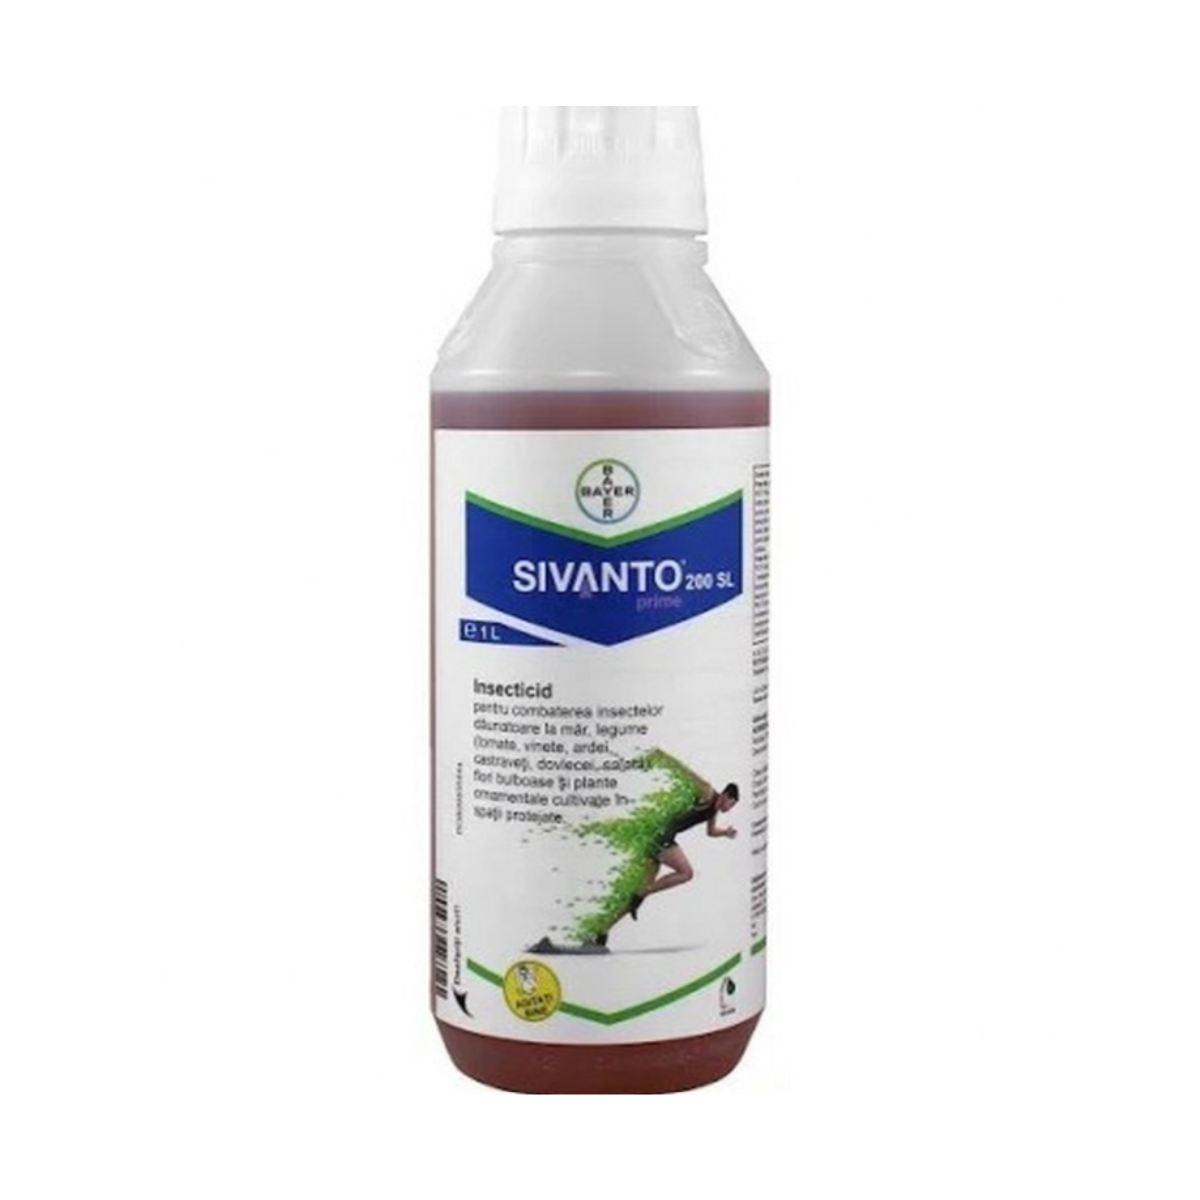 Insecticide - Insecticid SIVANTO PRIME, 1L, BAYER, hectarul.ro